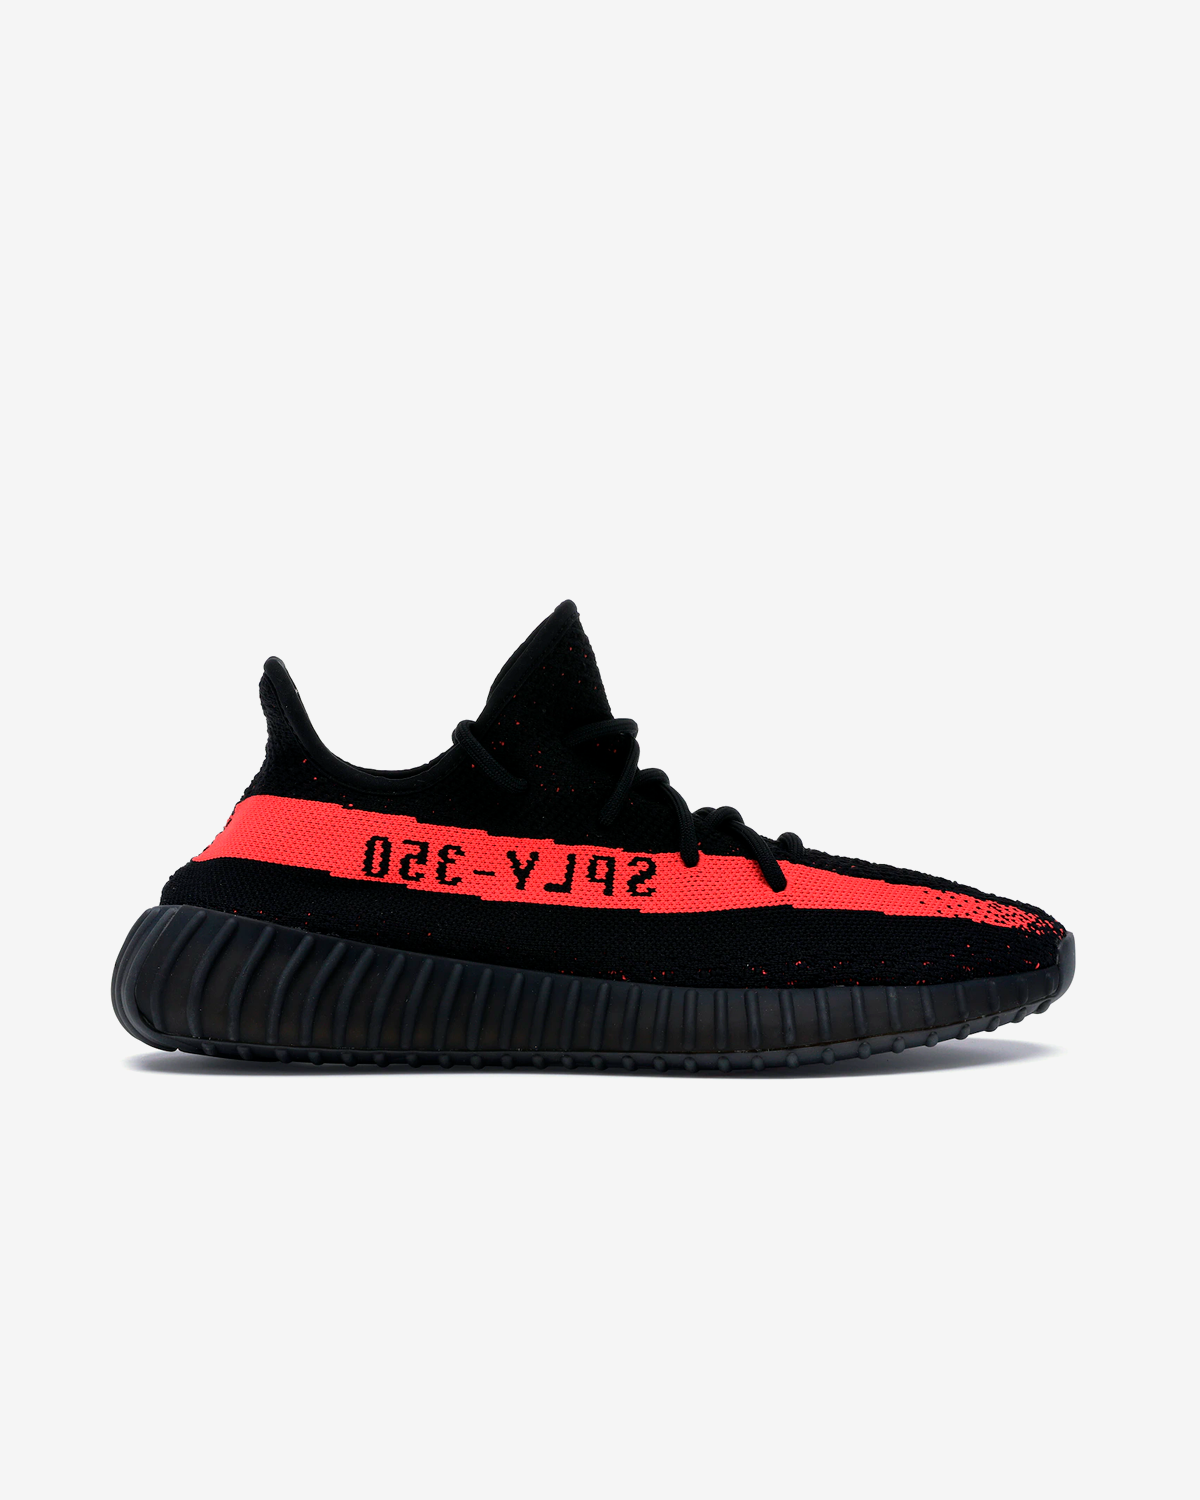 adidas YEEZY Boost 350 V2 "Core Black Red"